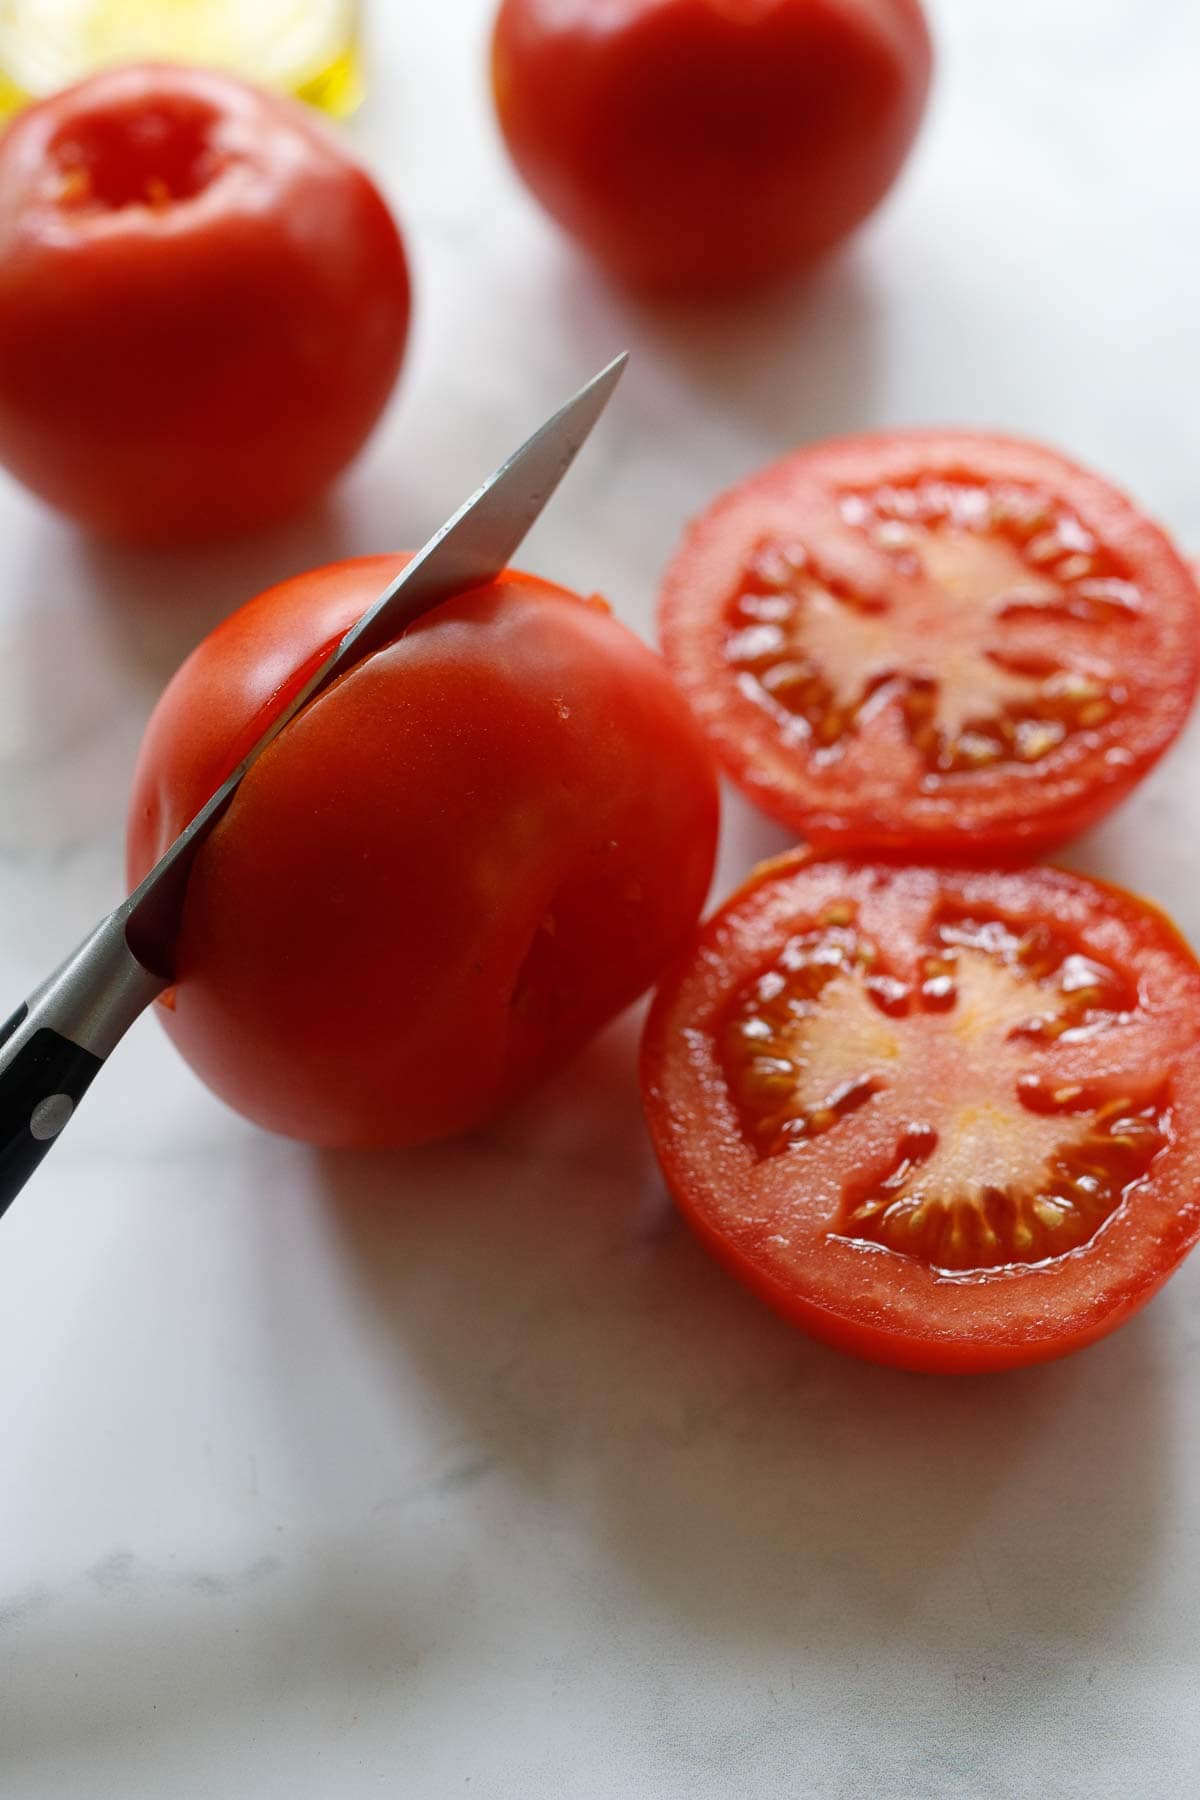 slicing the tomatoes in half.